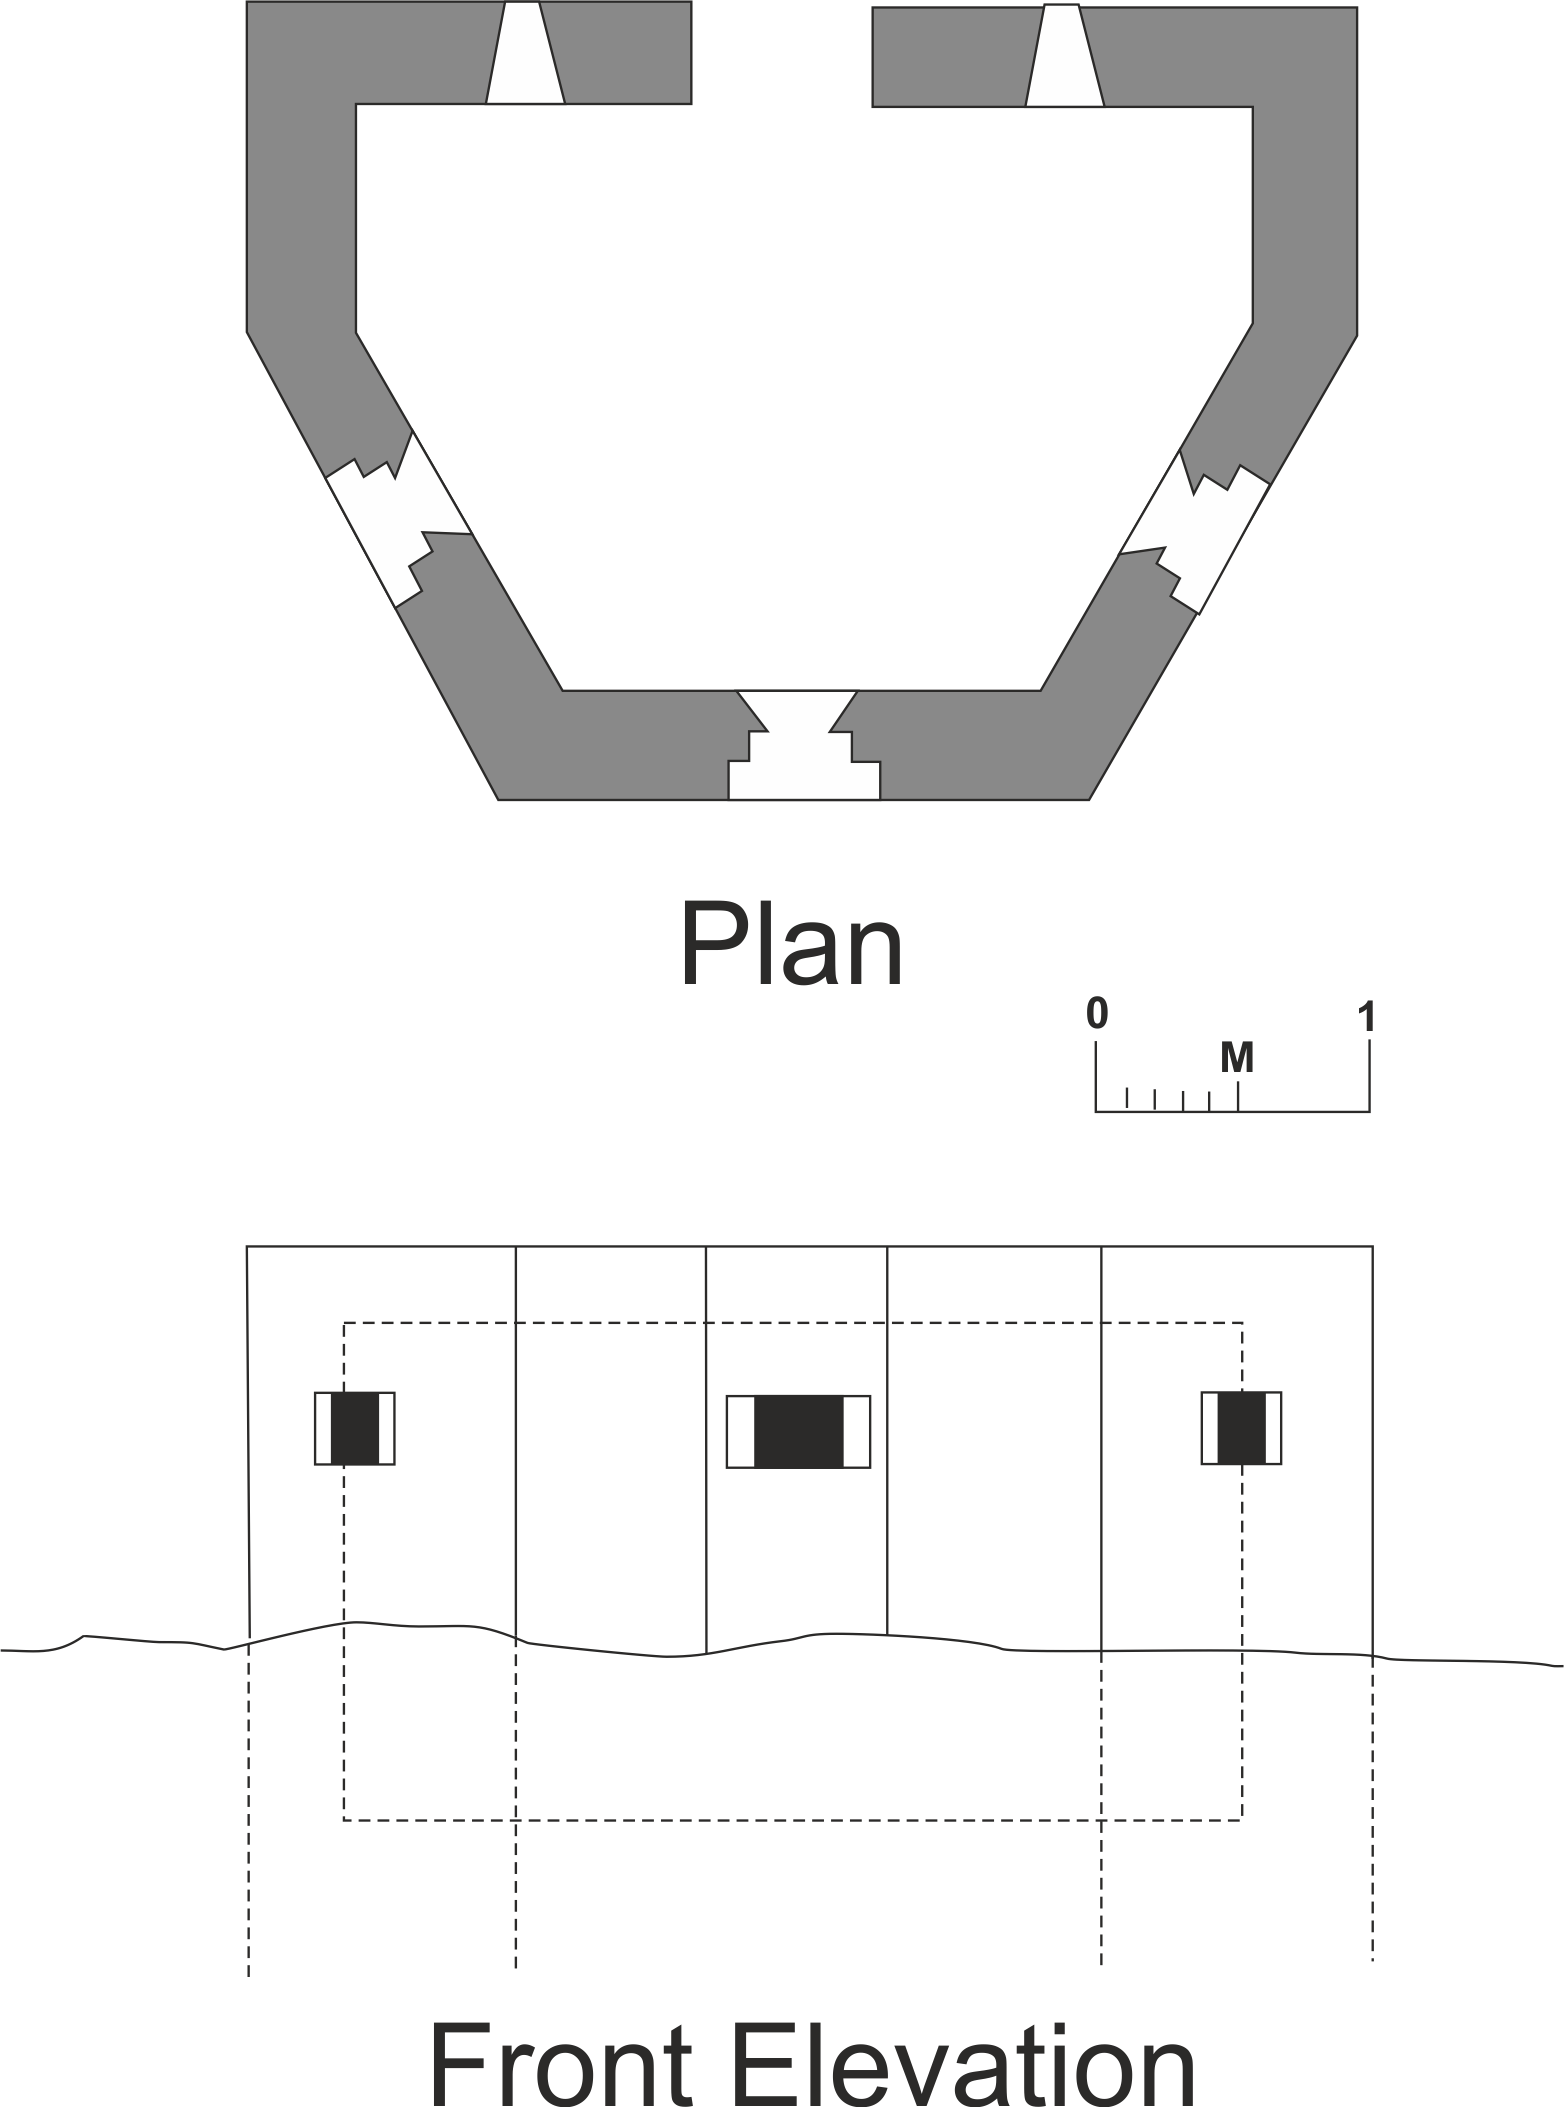 Typical D Shaped Pillbox